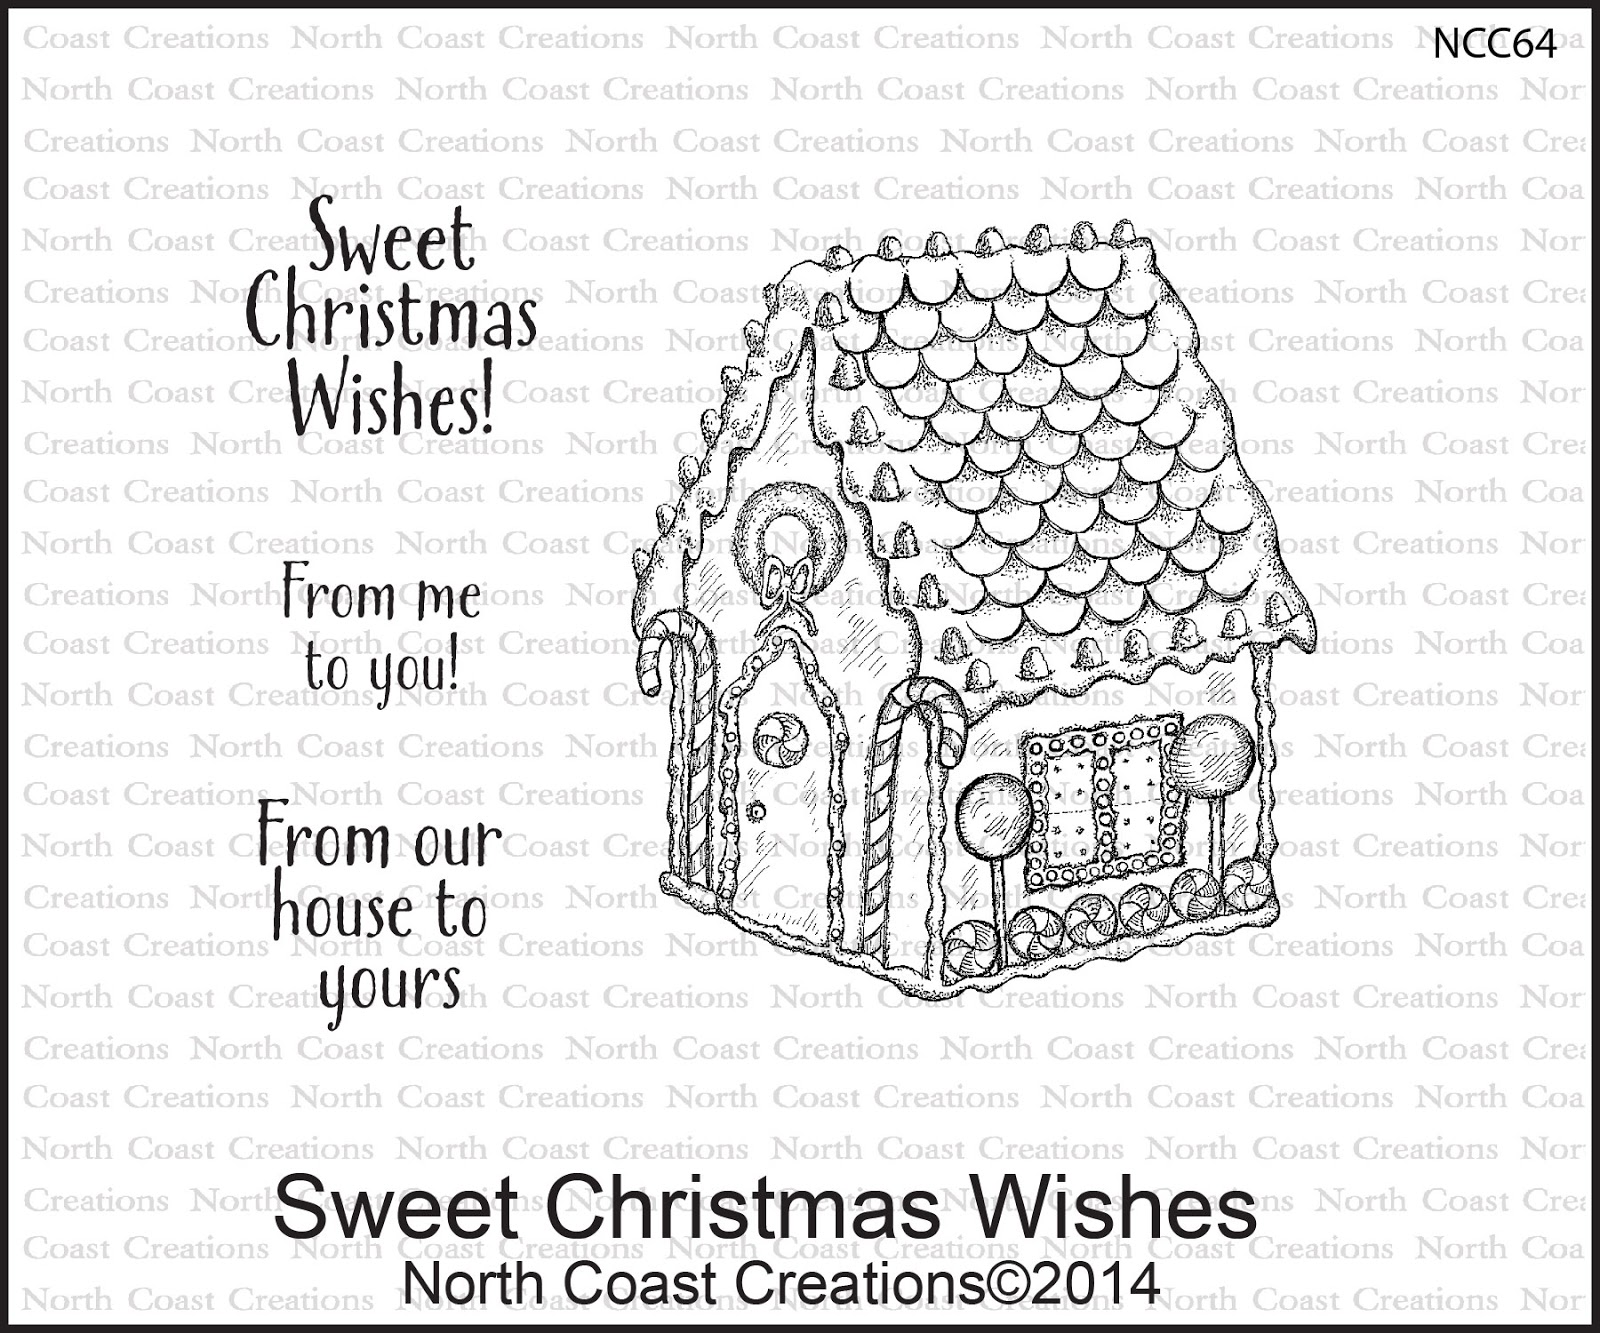 https://www.northcoastcreations.com/index.php/new-releases/2014-september/ncc64-sweet-christmas-wishes.html